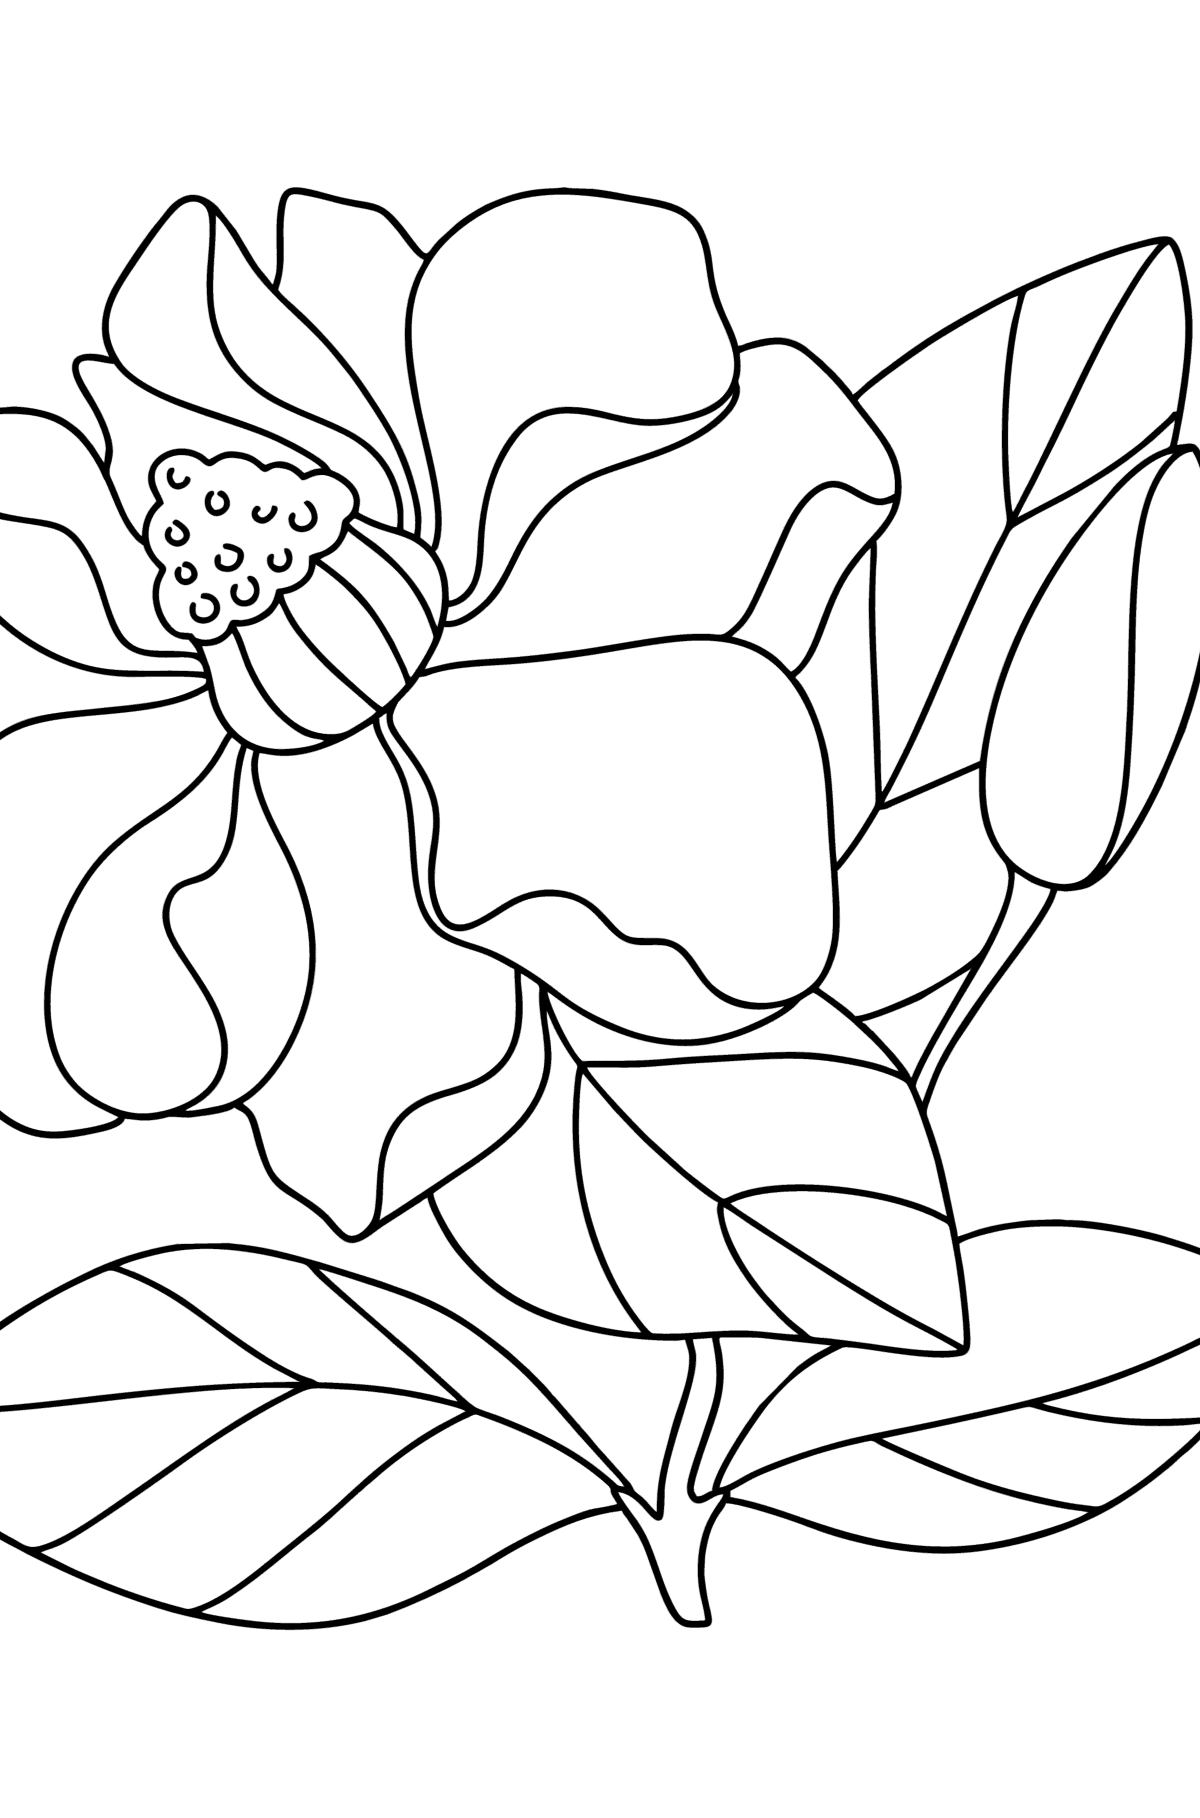 Magnolia coloring page - Coloring Pages for Kids